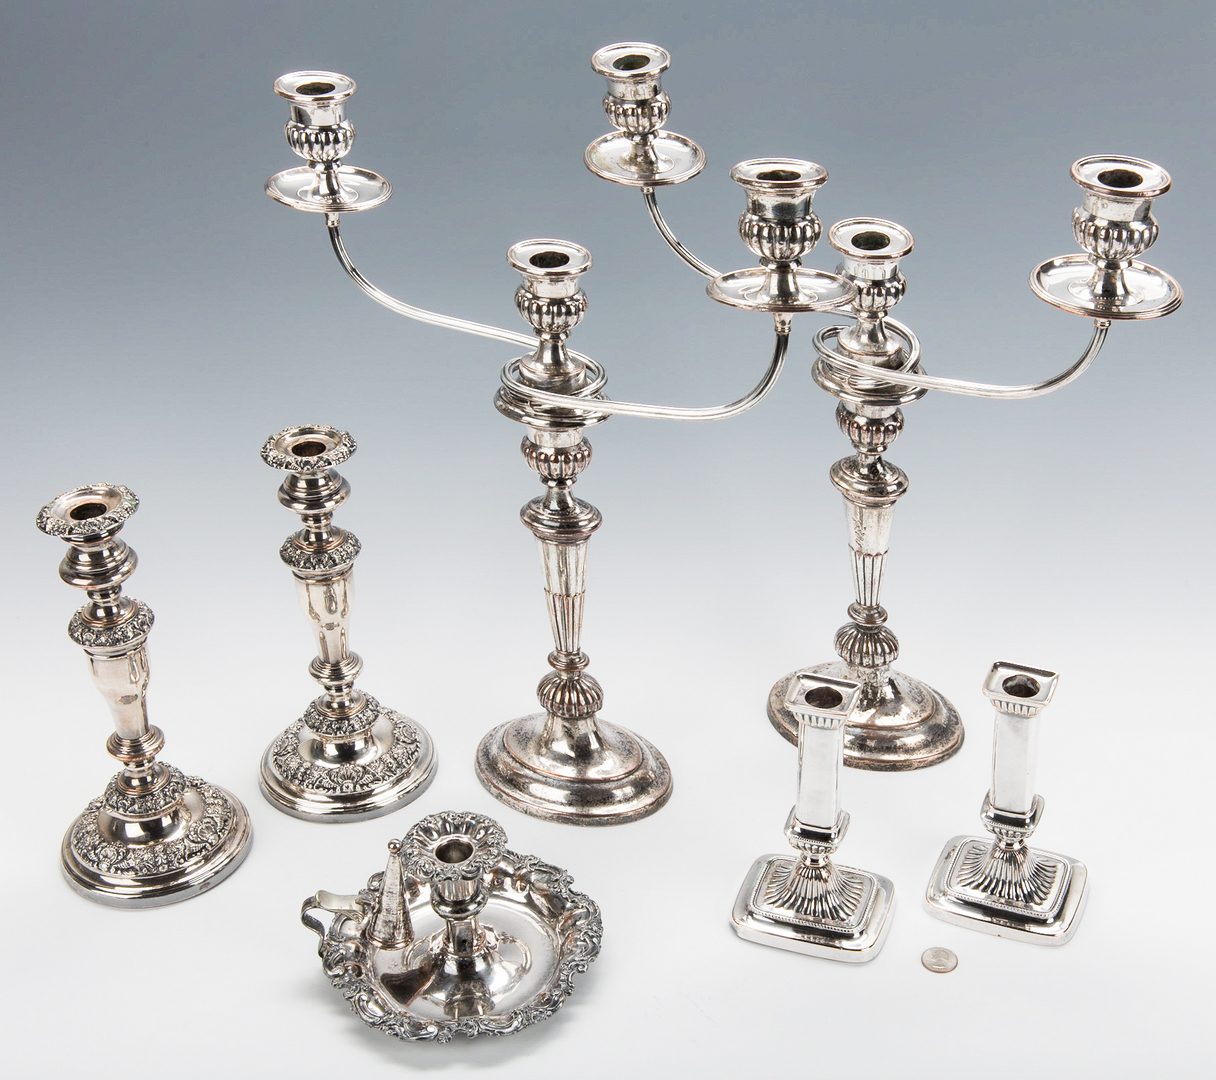 Lot 879: Group of Old Sheffield Plate Candlesticks and Lighting